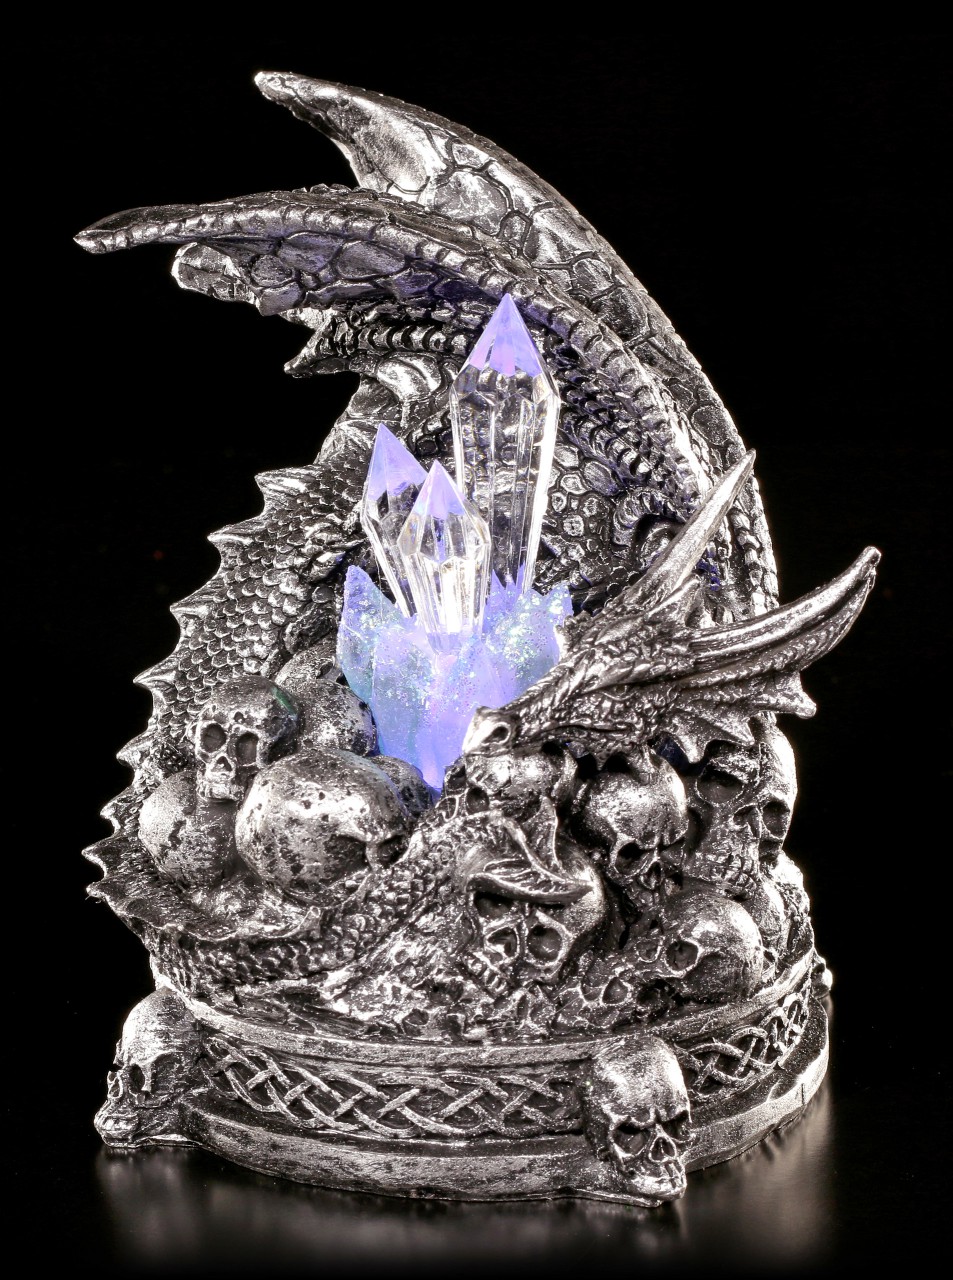 Dragon Figurine - Crome guards Crystals LED